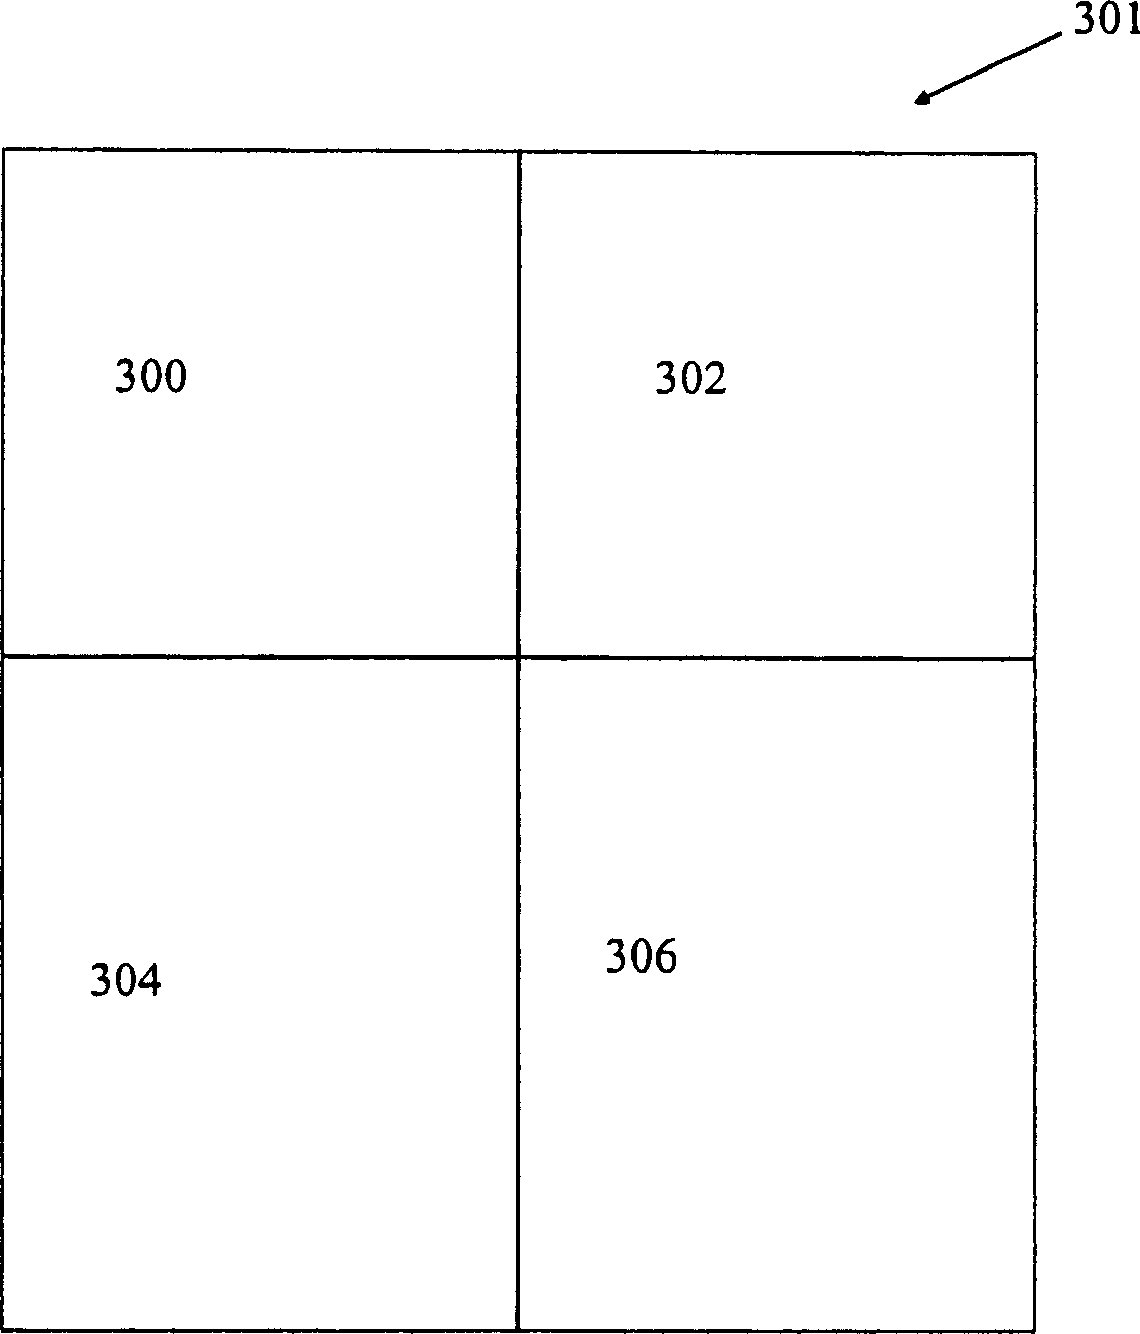 System and method for applying development patterns for component based applications